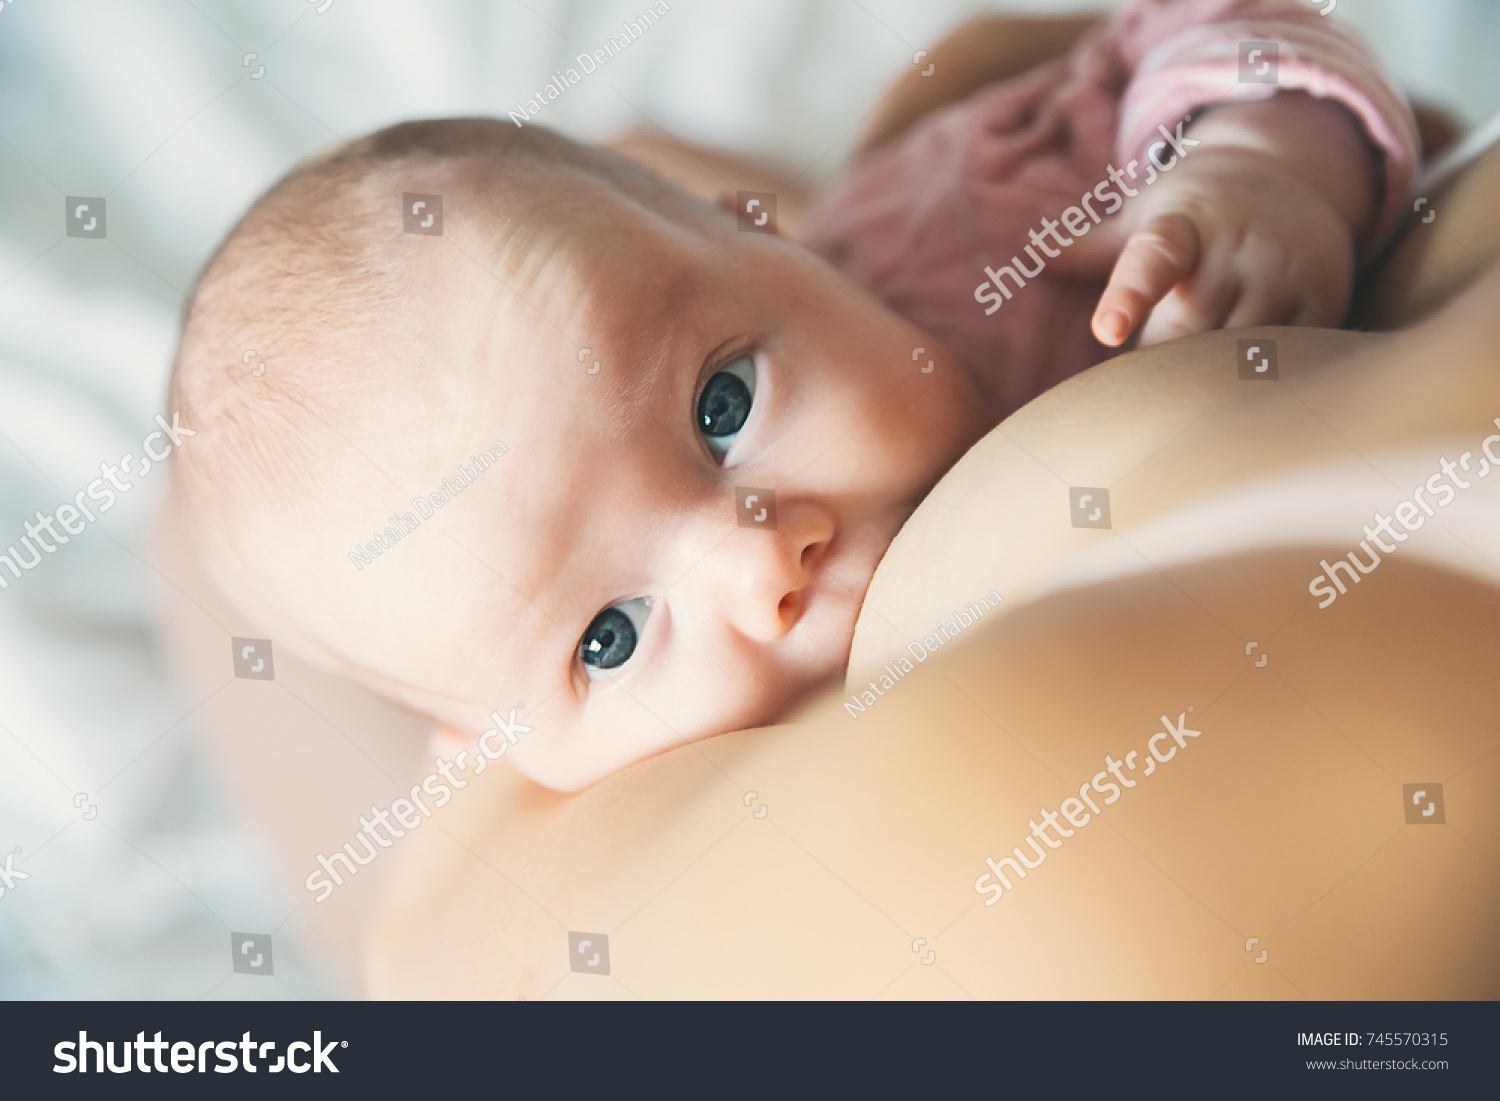 Baby eating mother's milk. Mother breastfeeding baby. Beautiful mom breast feeding her newborn child. Young woman nursing and feeding baby. Concept of lactation infant. #745570315